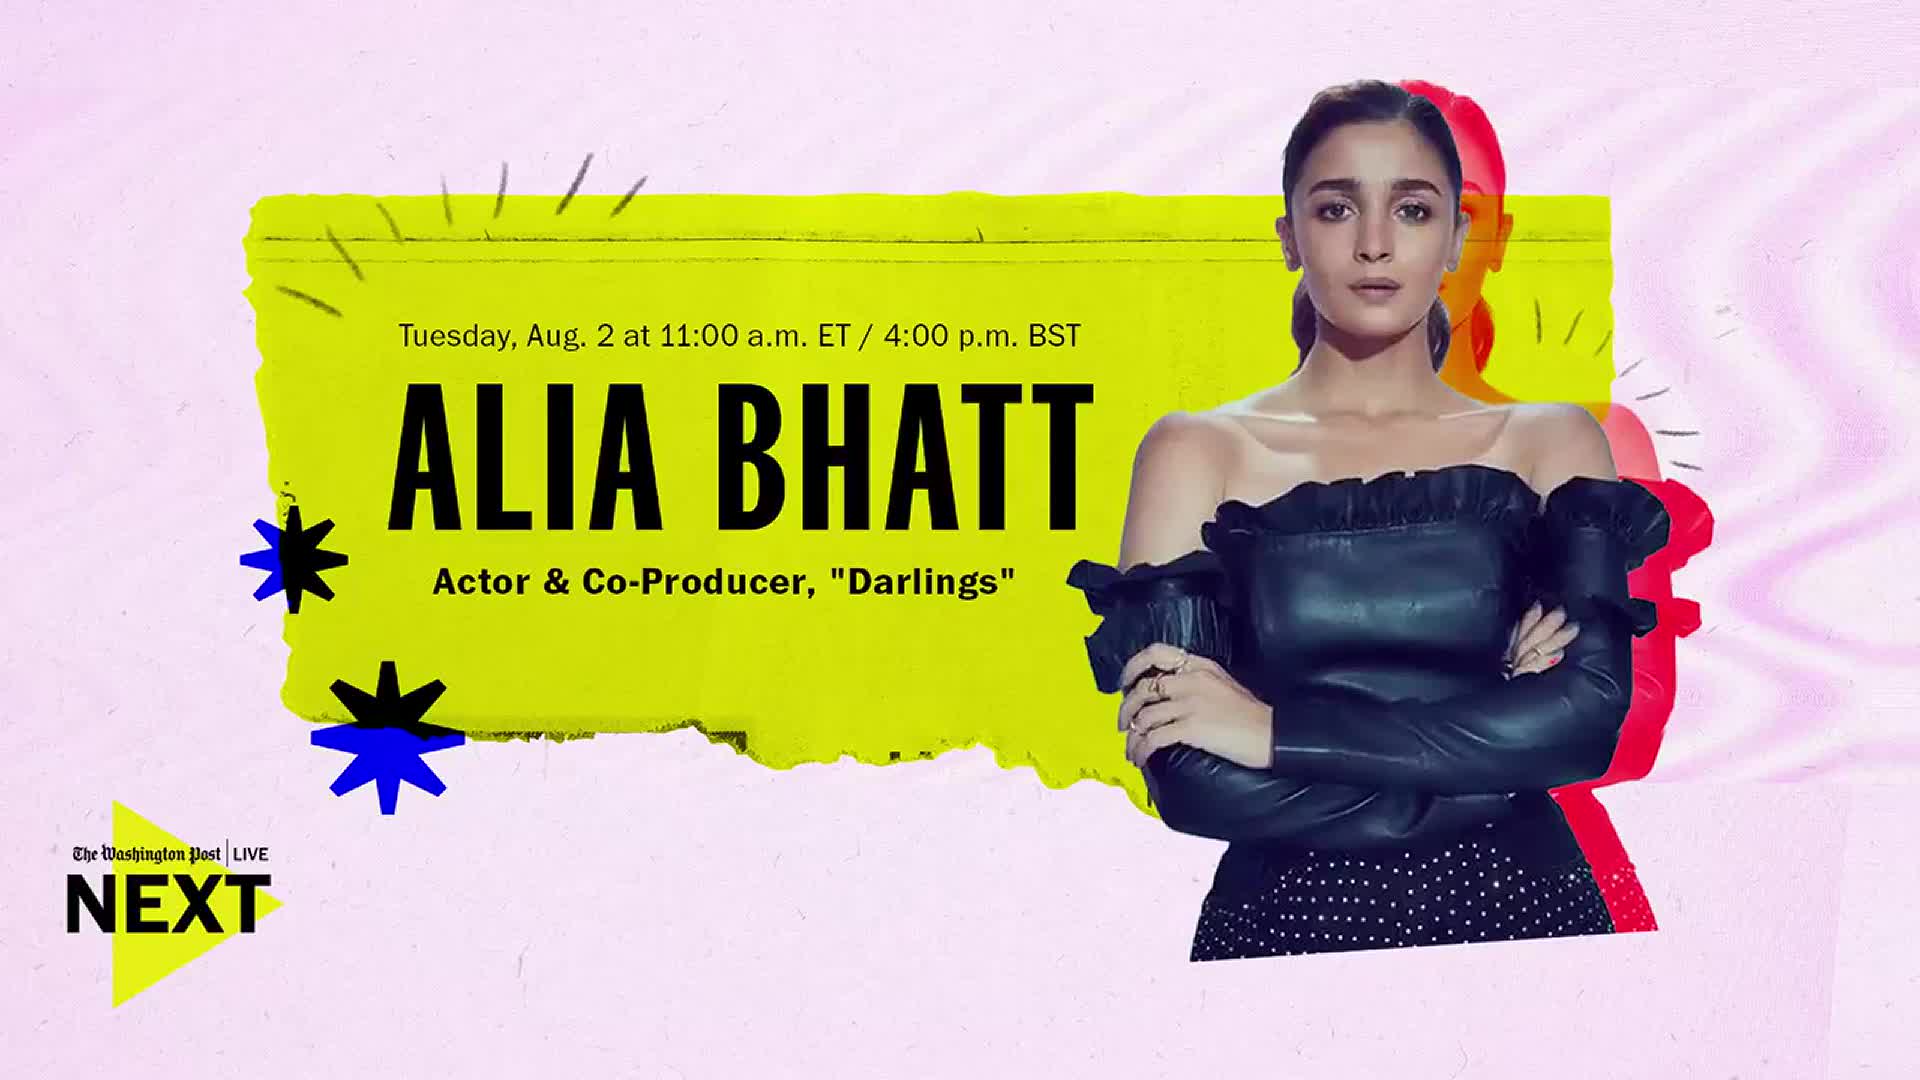 Bollywood star Alia Bhatt on her new projects and the next wave of Indian  entertainment - The Washington Post